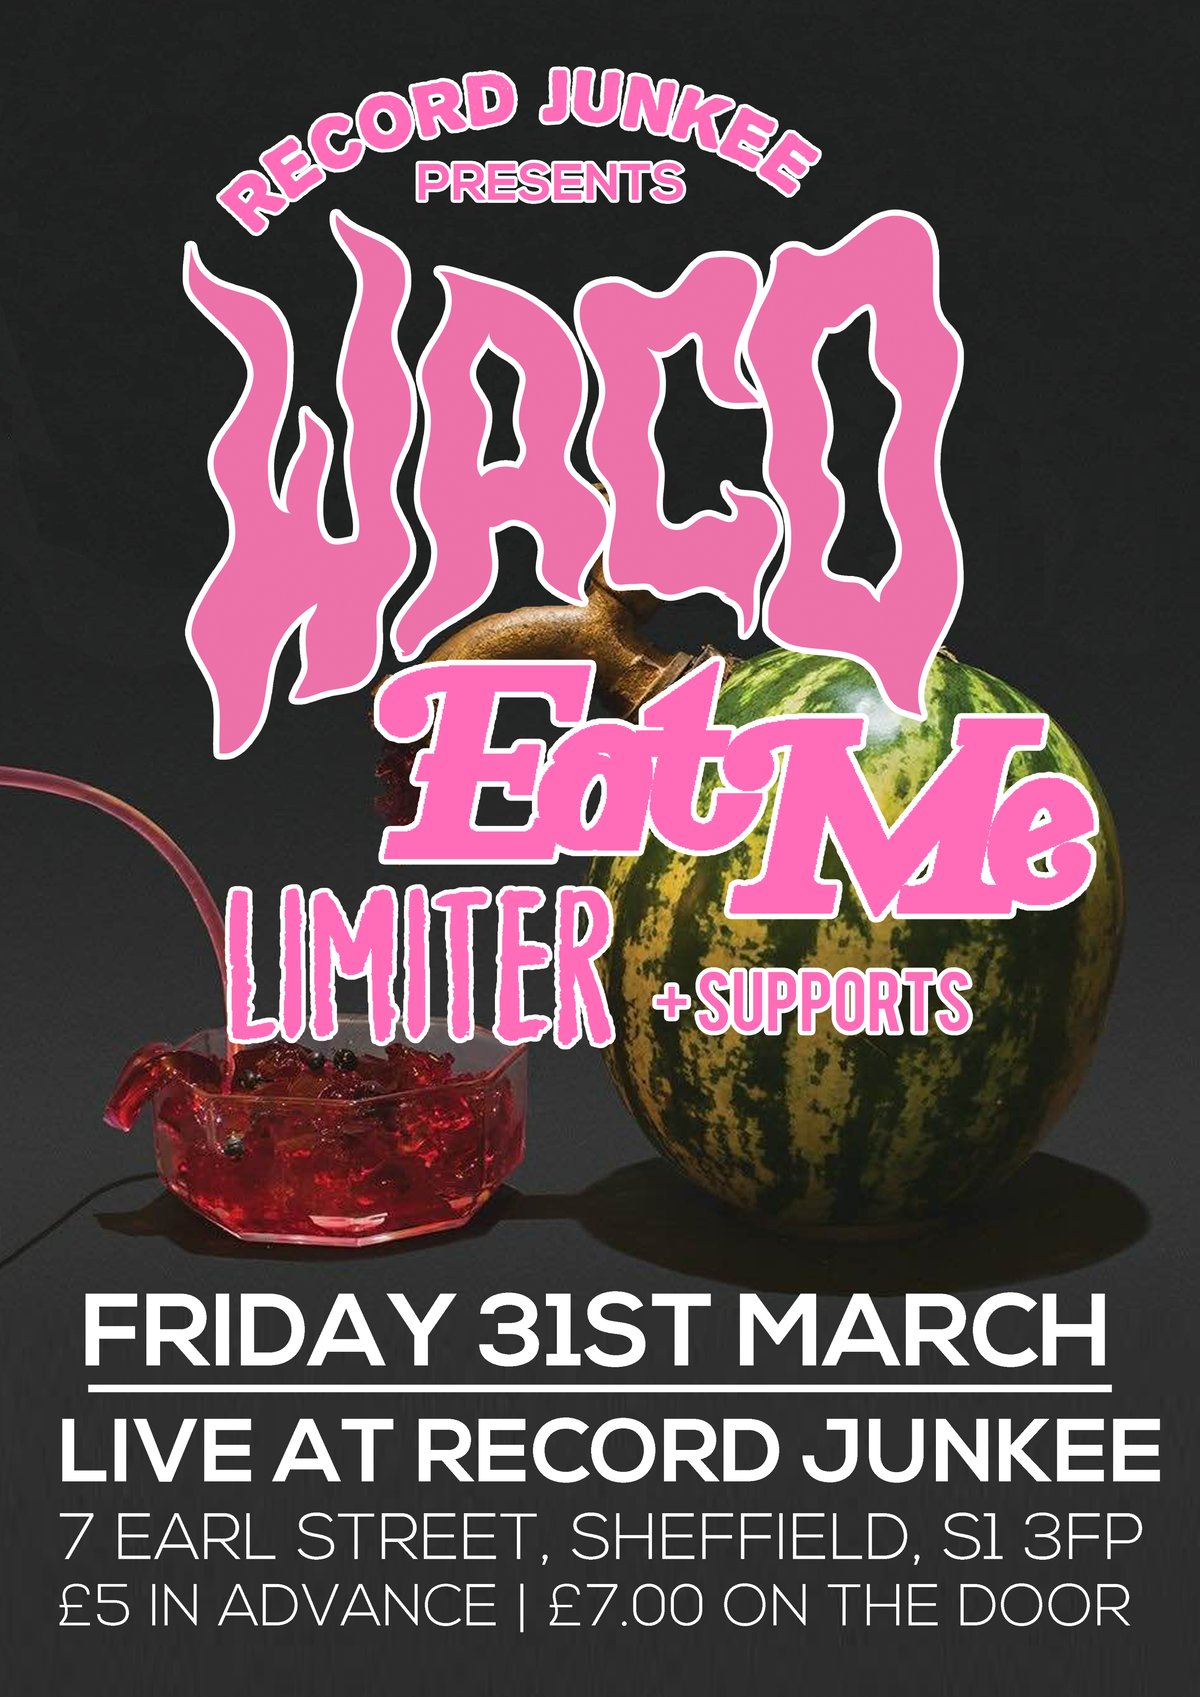 Image of RECORD JUNKEE PRESENTS IN ASSOCIATION WITH VENN RECORDS: Waco + Eat Me + support